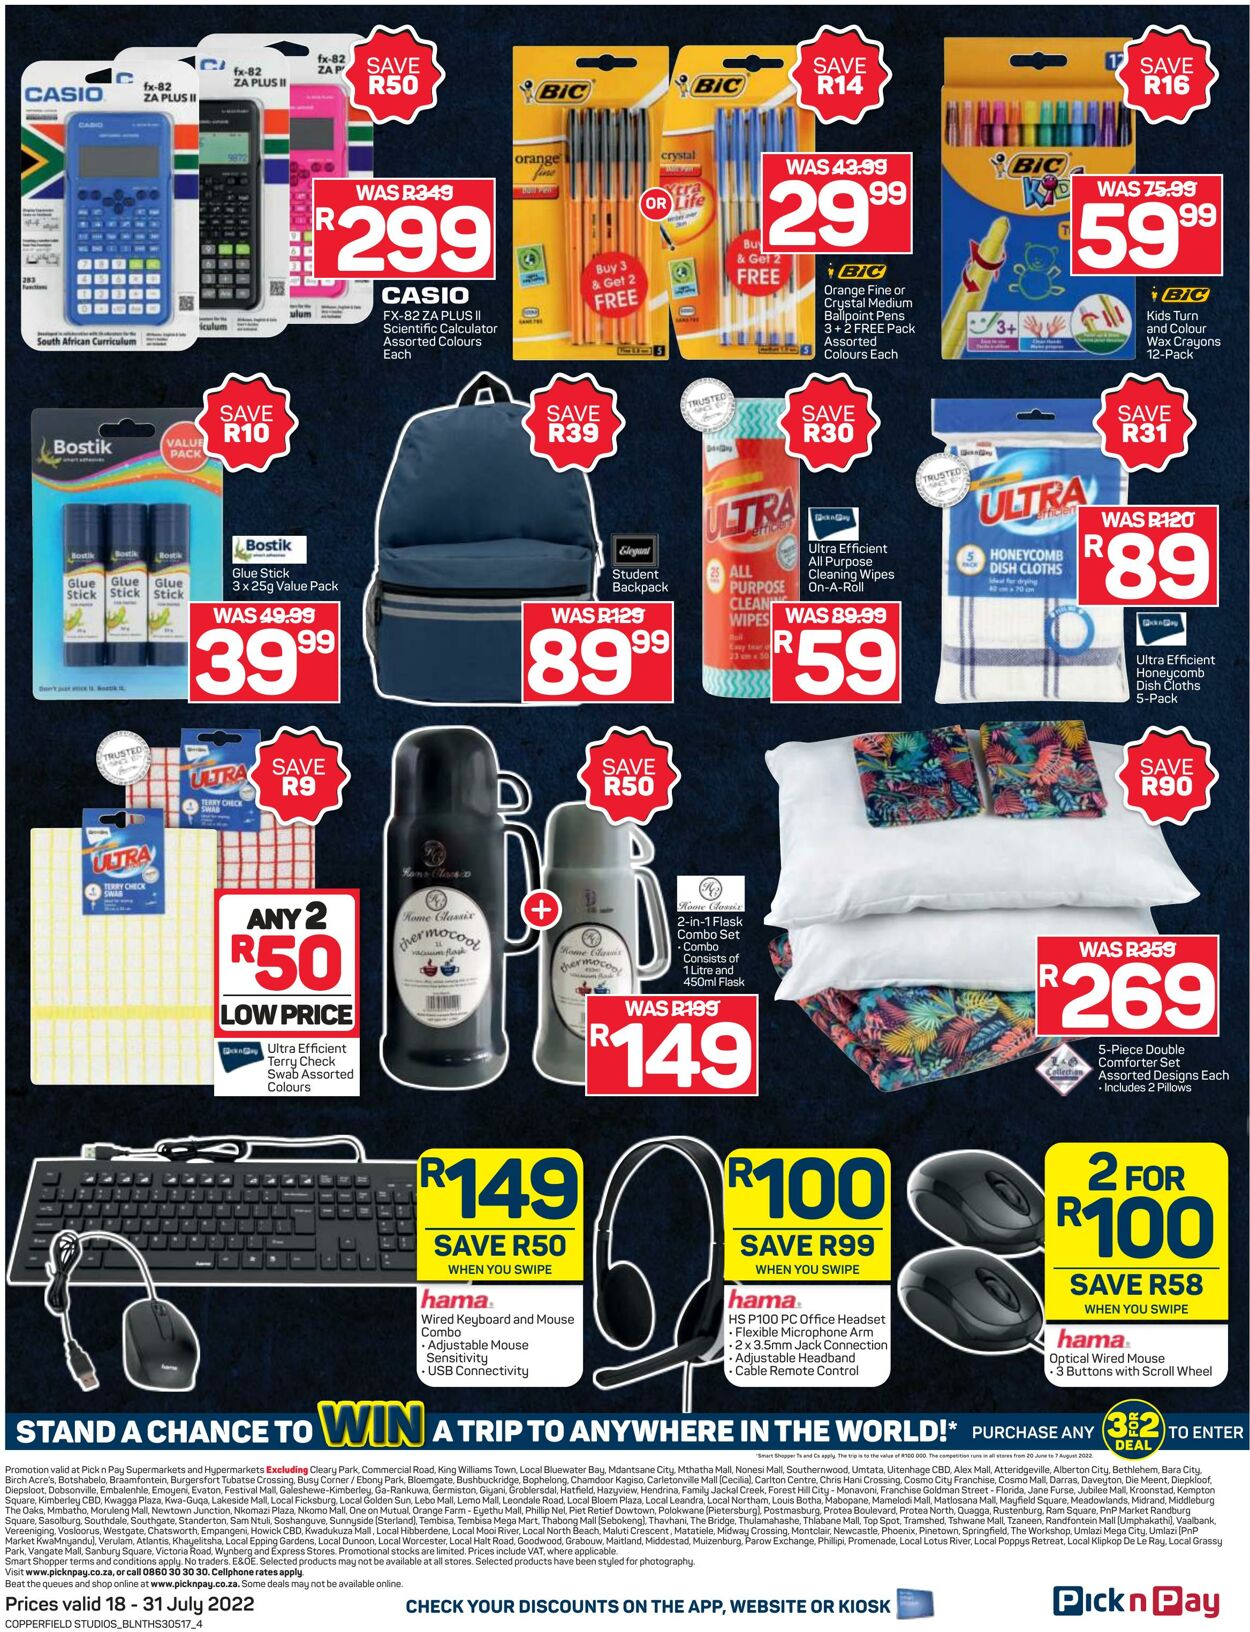 Special Pick n Pay 18.07.2022 - 31.07.2022